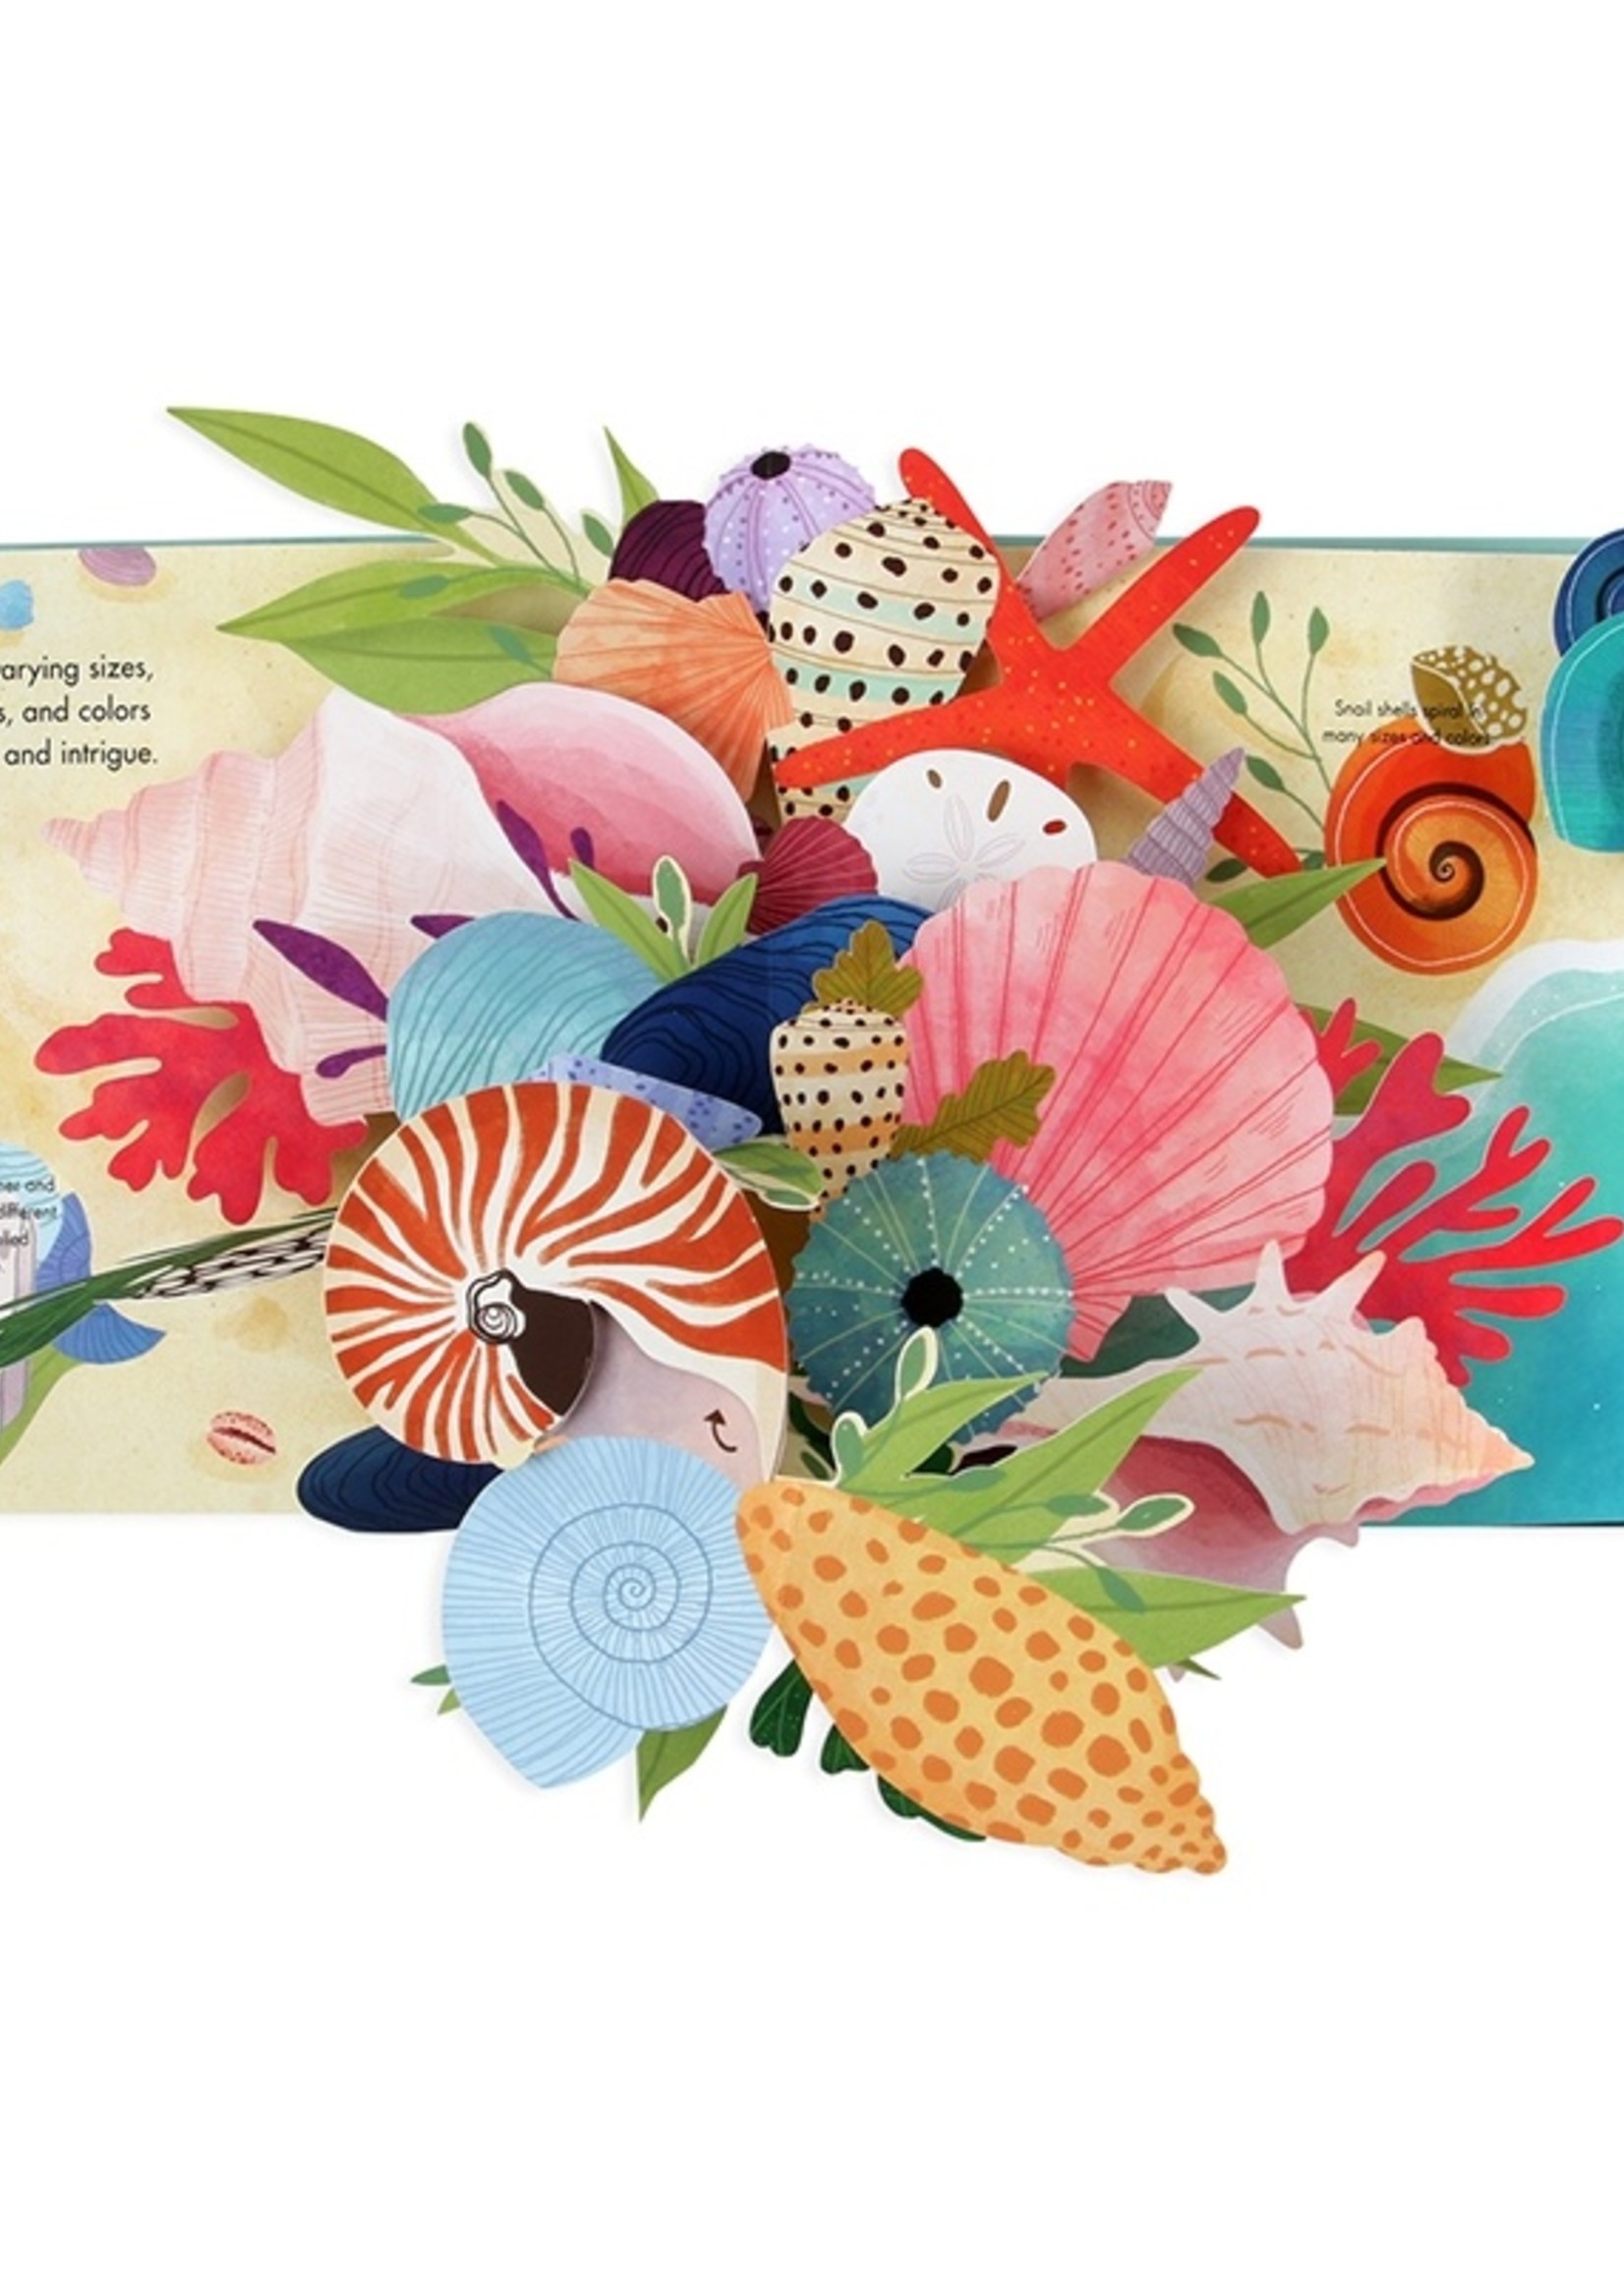 Up With Paper Shells: A Pop-Up Book Of Wonder